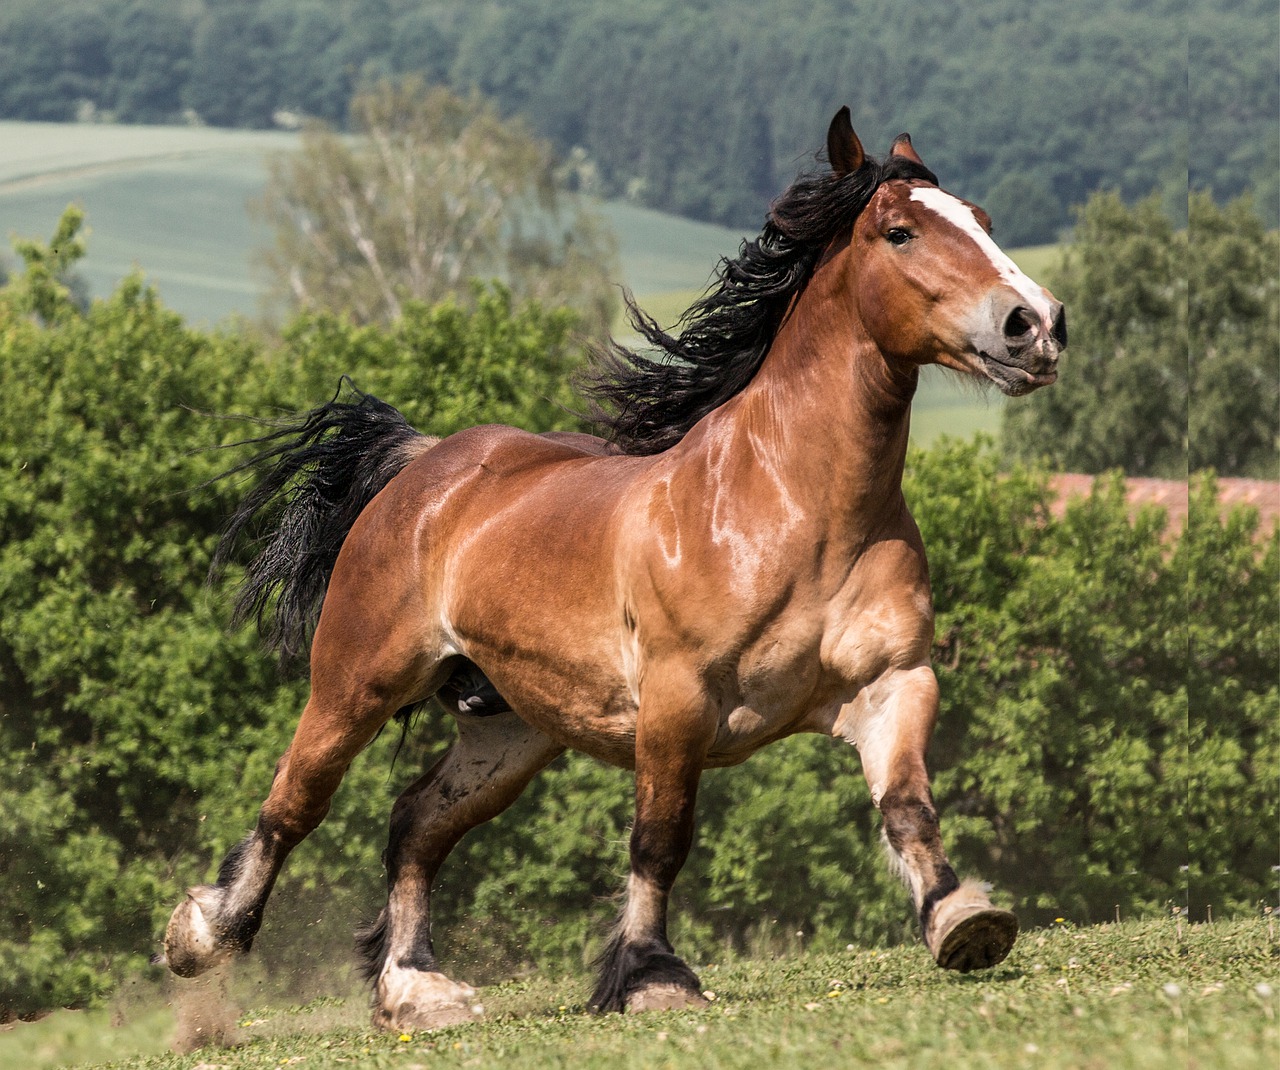 Large Brown Stallion running in the Pasture